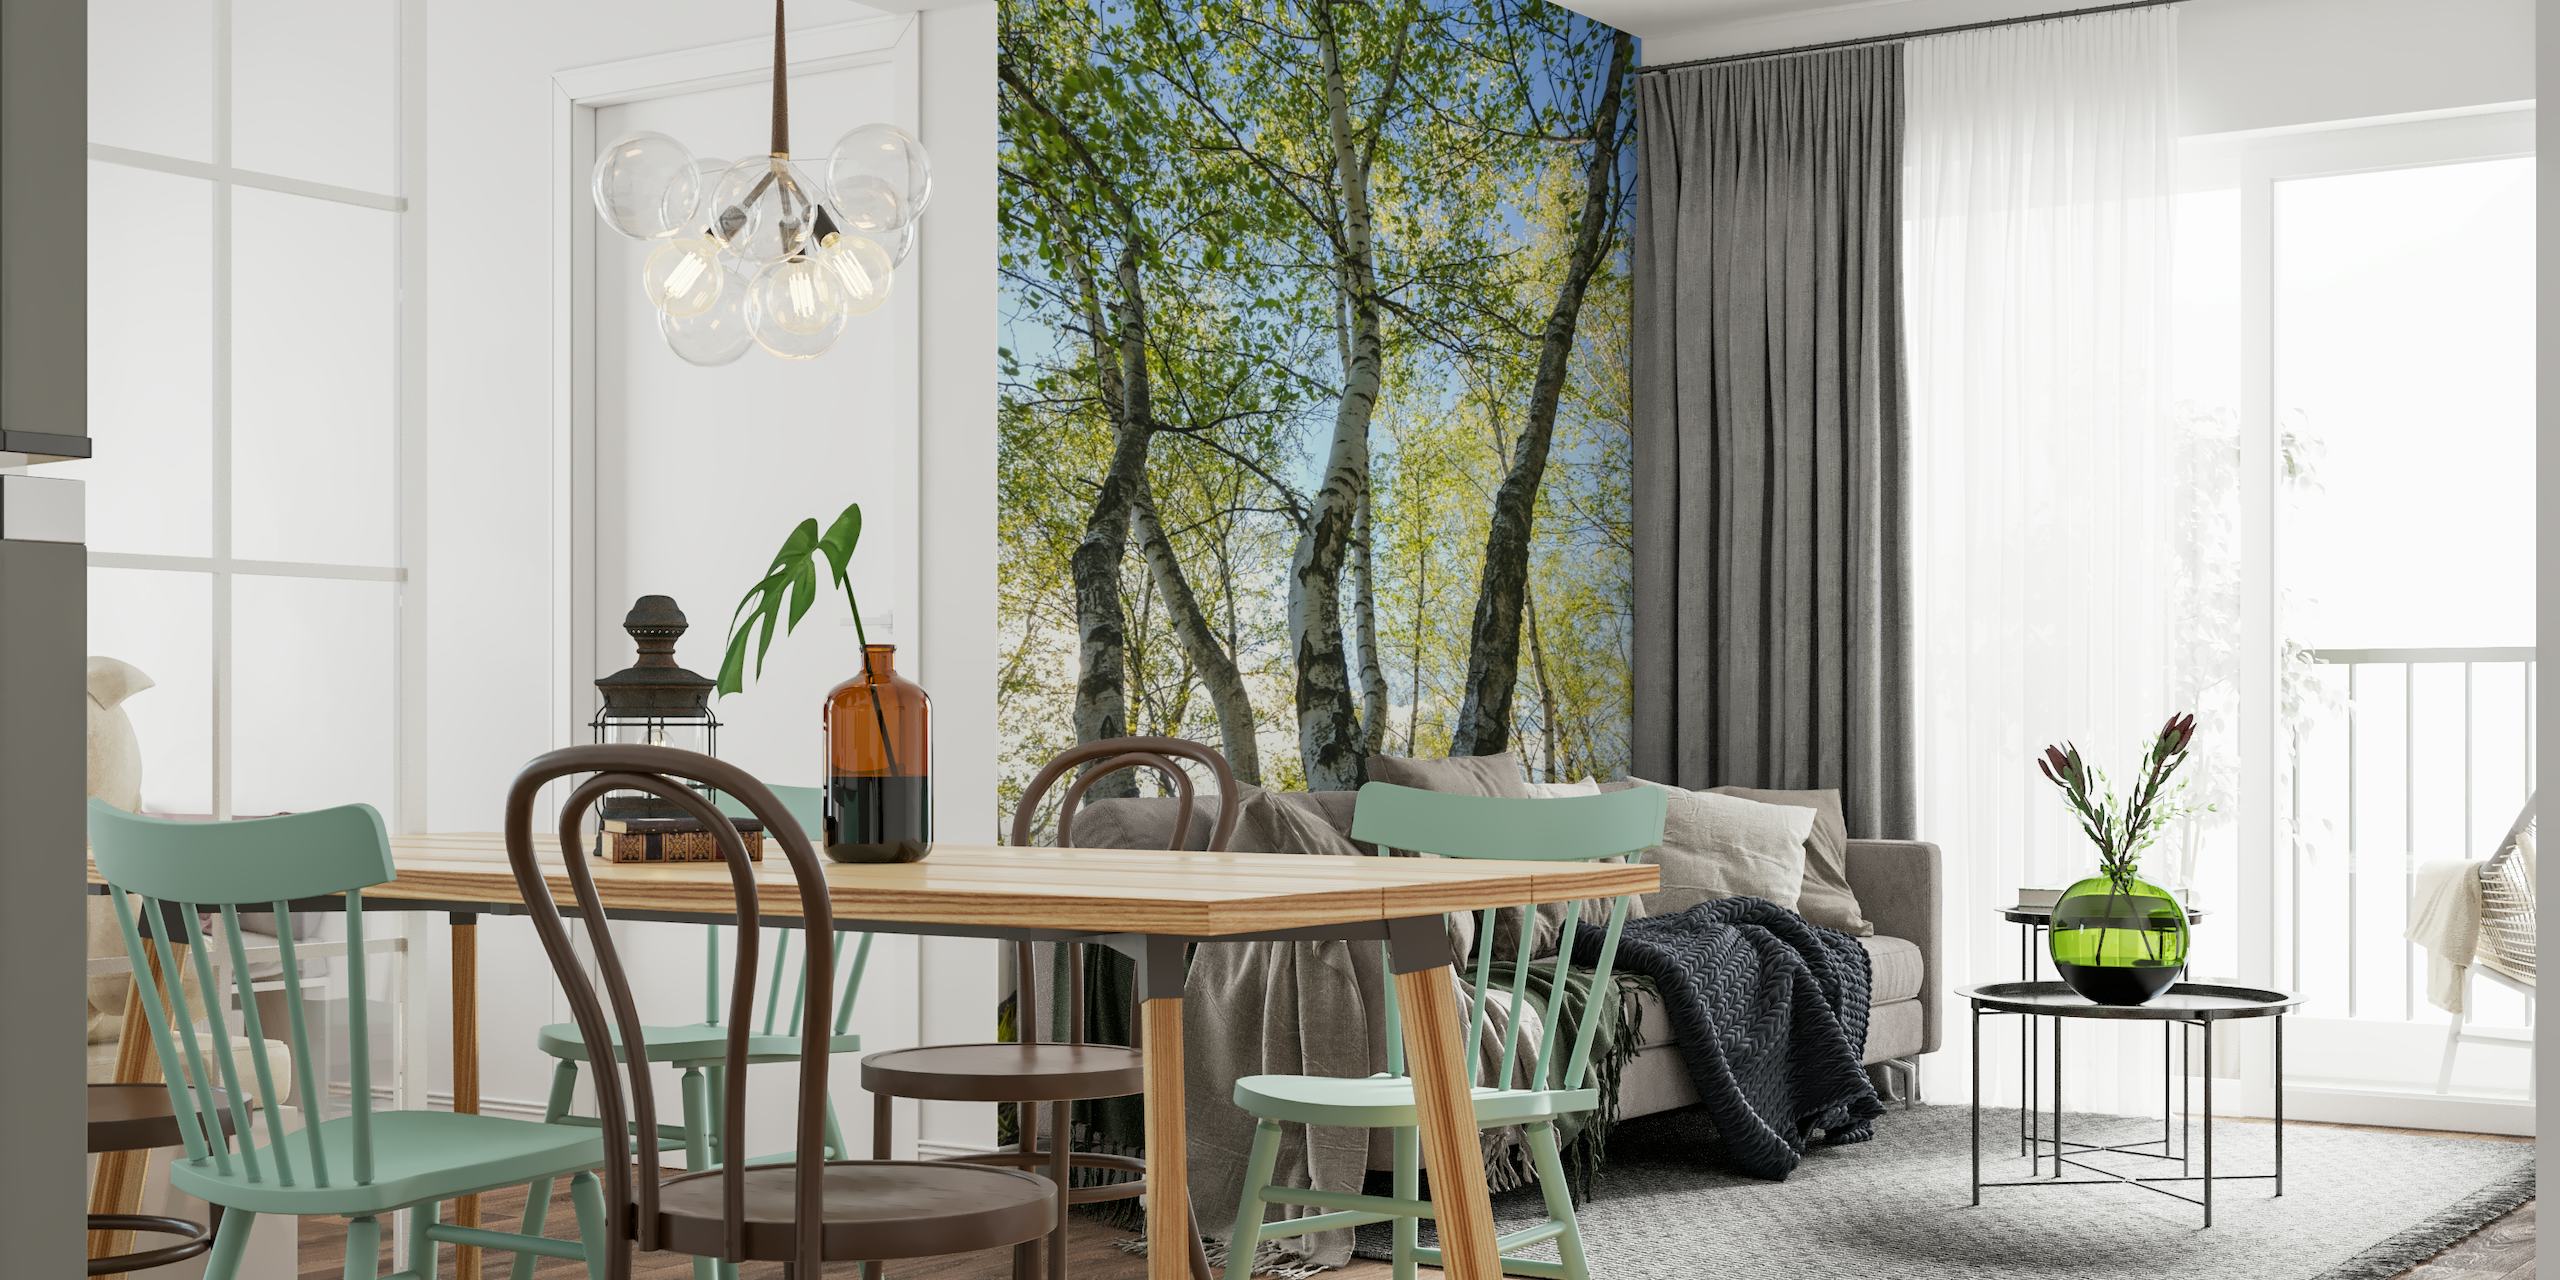 Birch trees wall mural with sunlight filtering through leaves